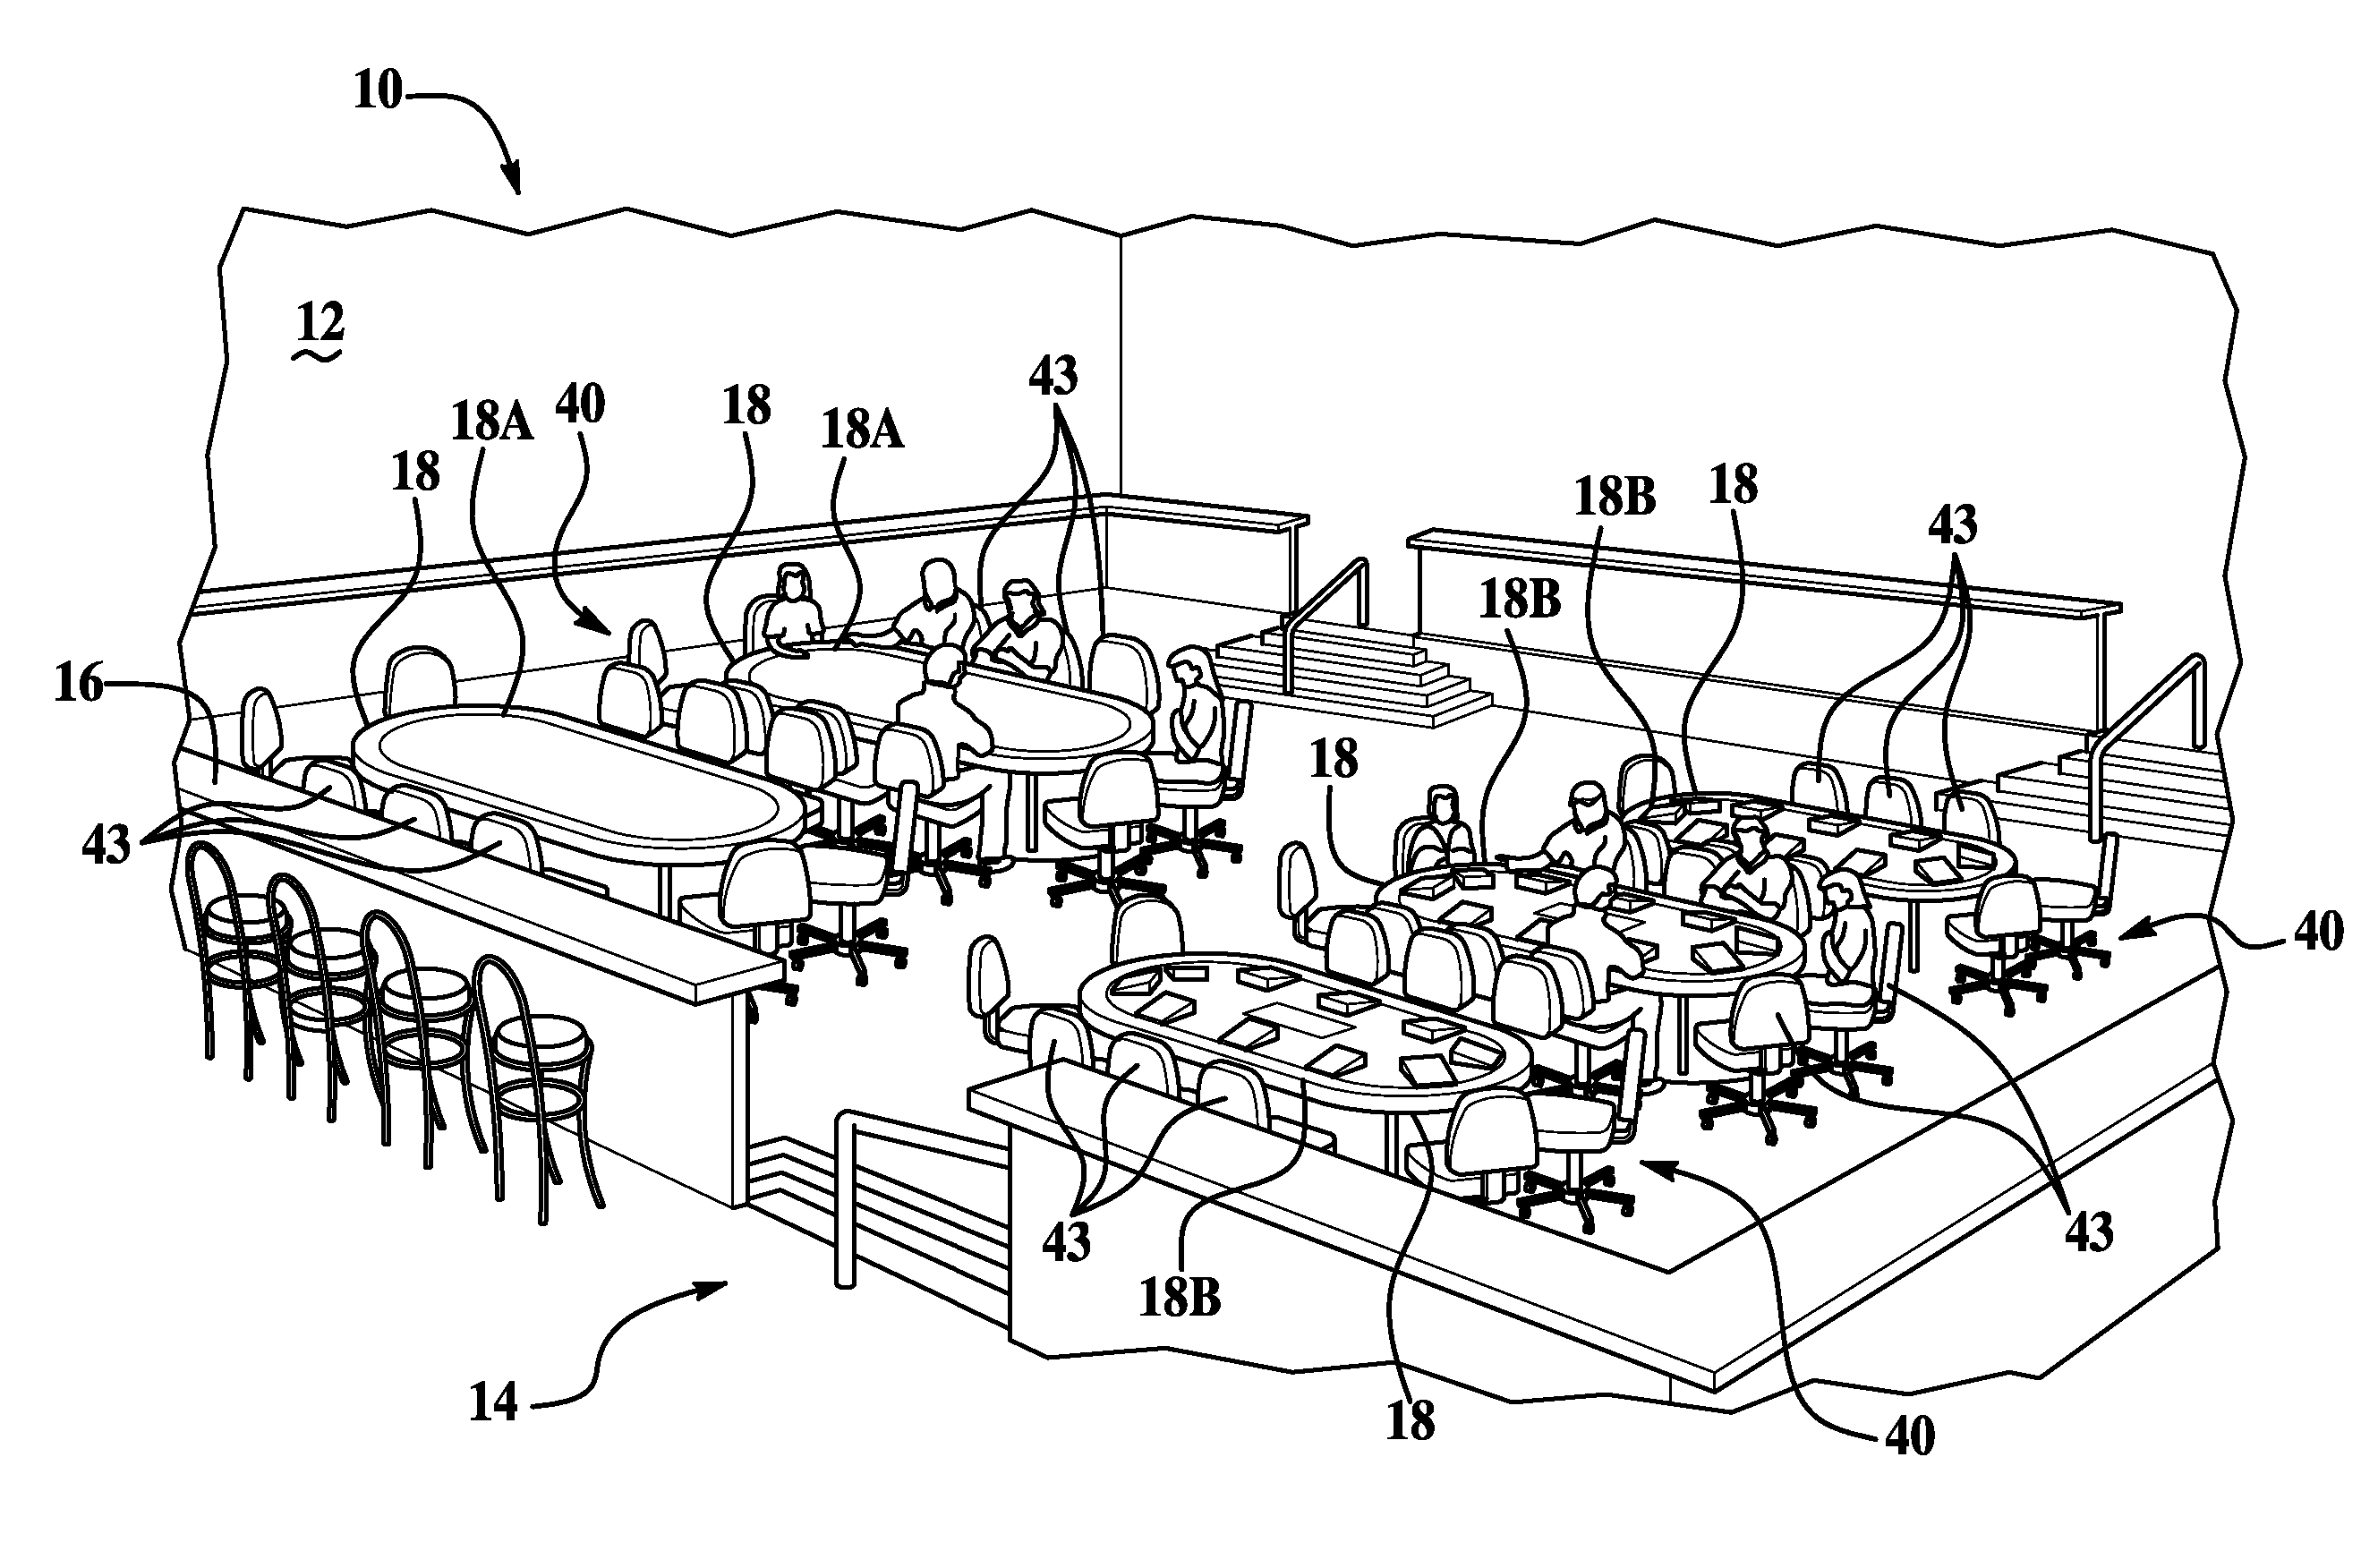 Method of reserving a seat at a gaming table